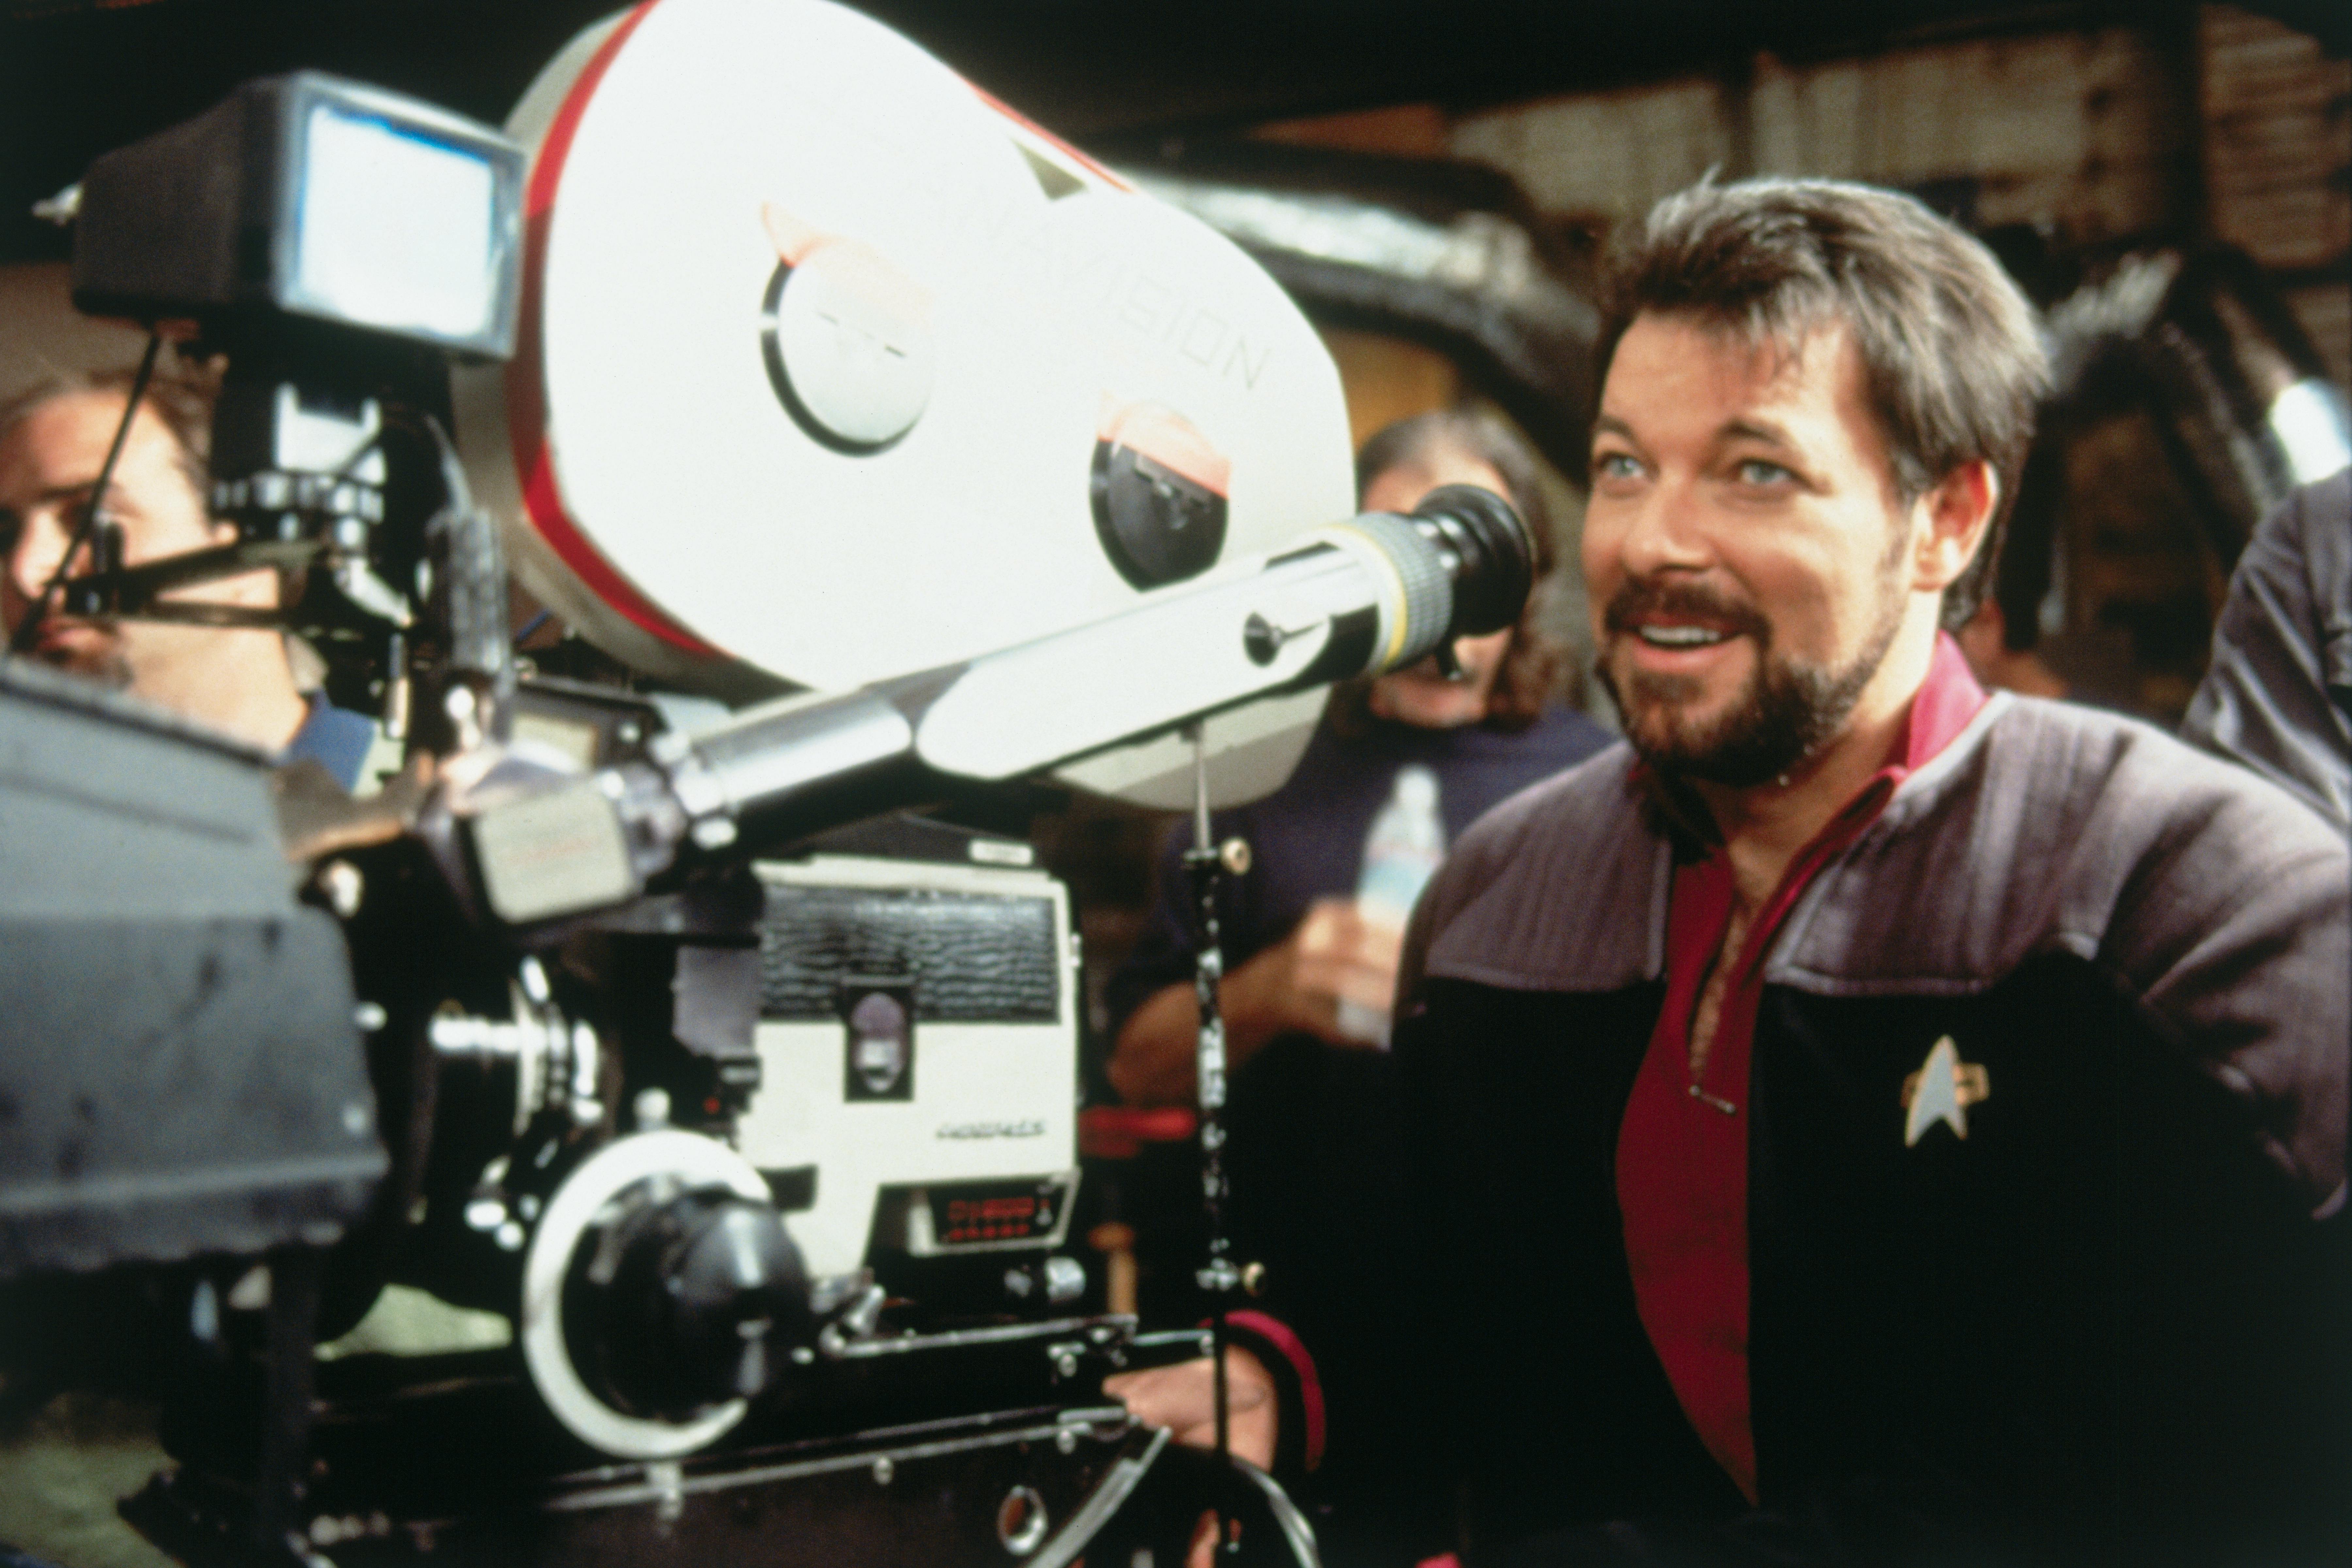 Jonathan Frakes behind the camera in Starfleet uniform smiling, filming First Contact